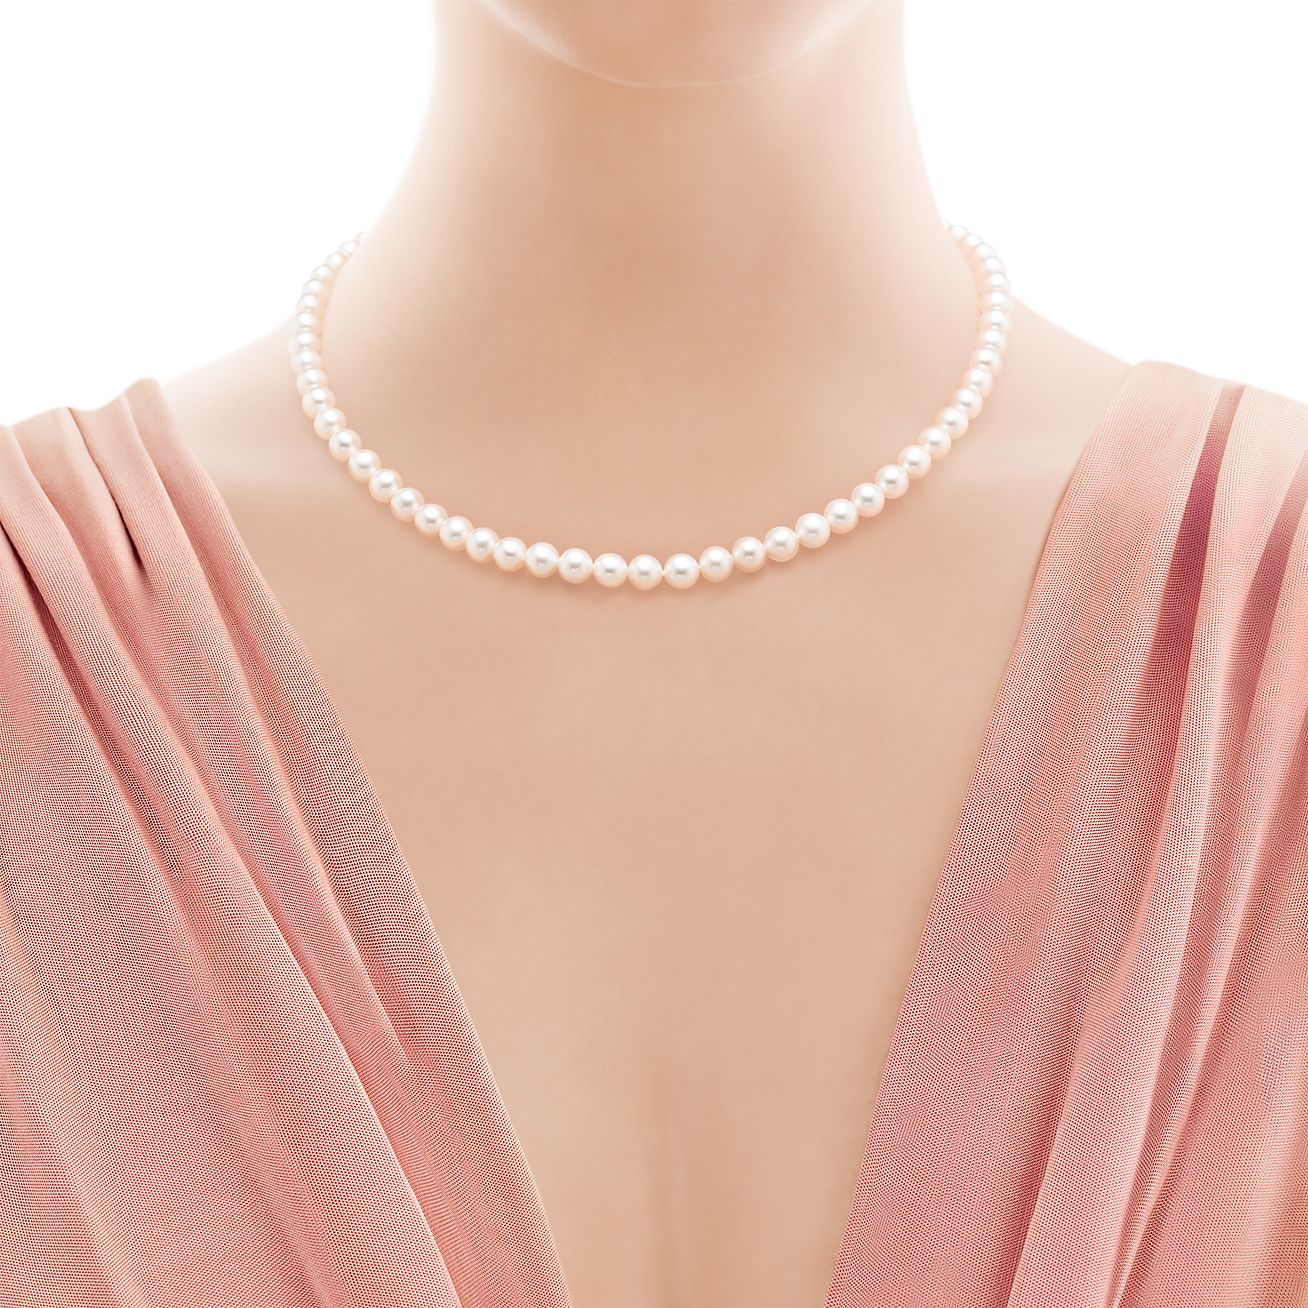 Ziegfeld Collection pearl necklace with 